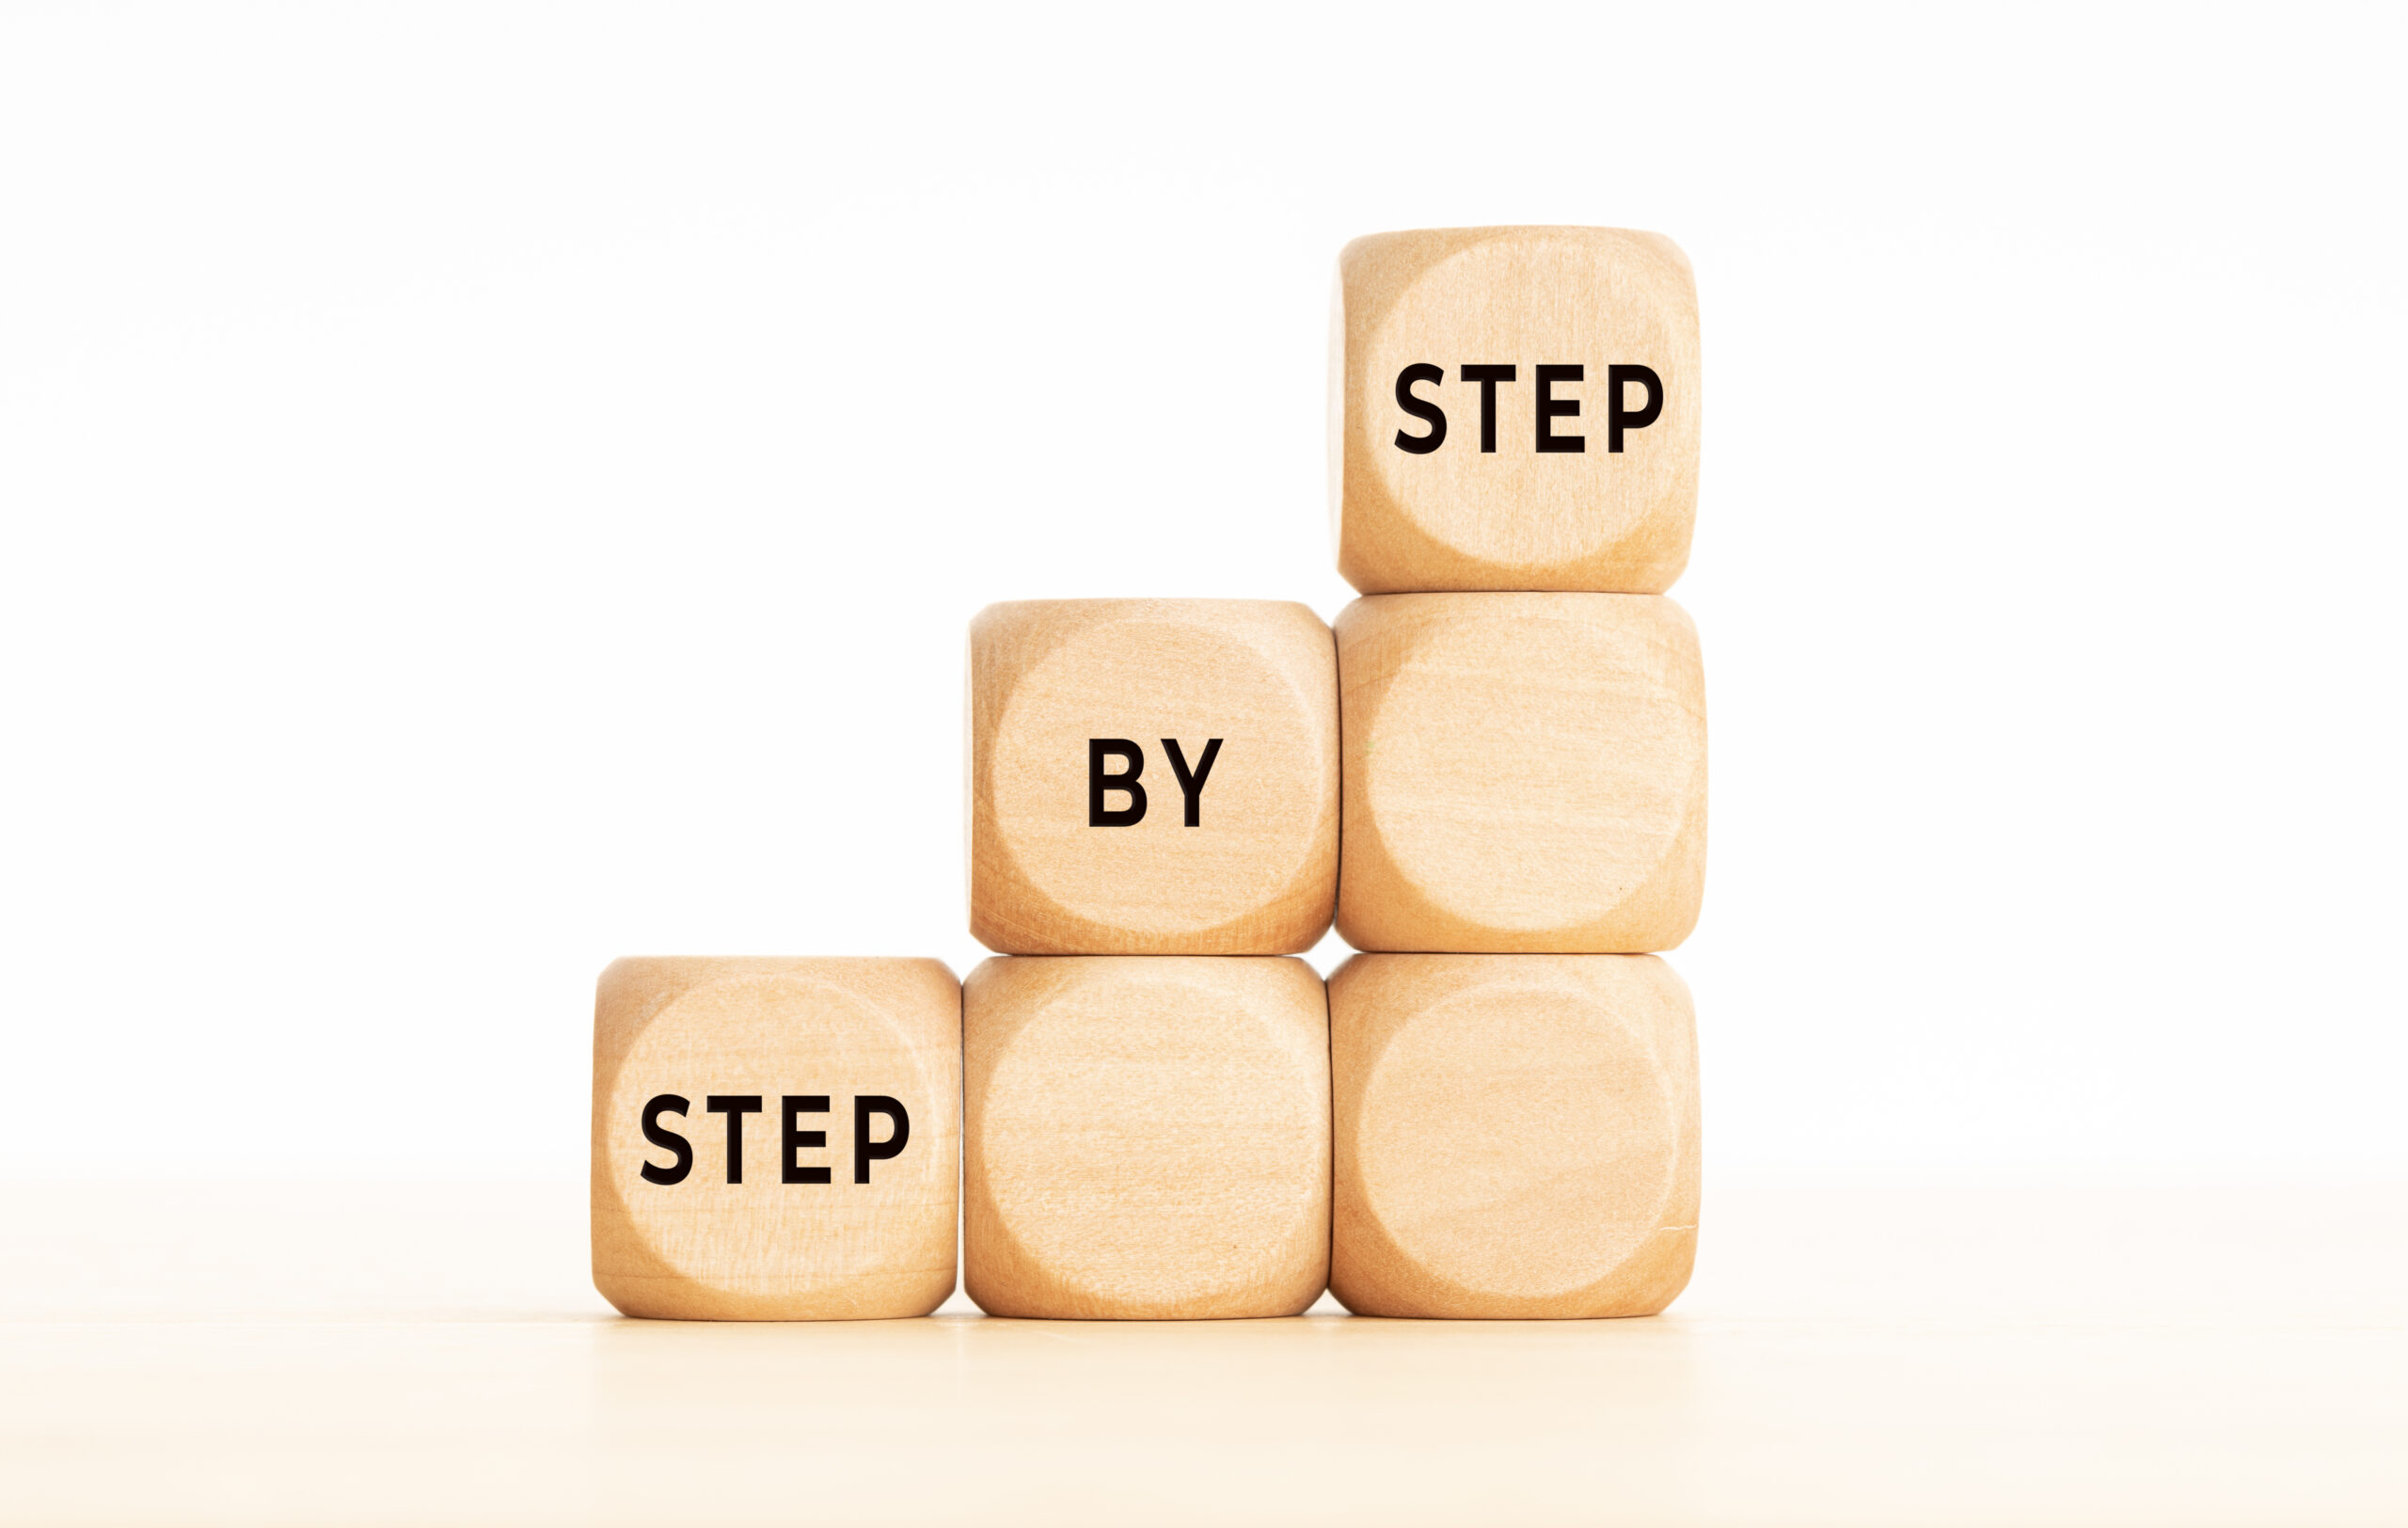 Image cover of the content about 'Step-by-step to create your first application plugin on StackSpot', where there is a step-by-step sentence in the form of a wooden block. Copy space. White background.